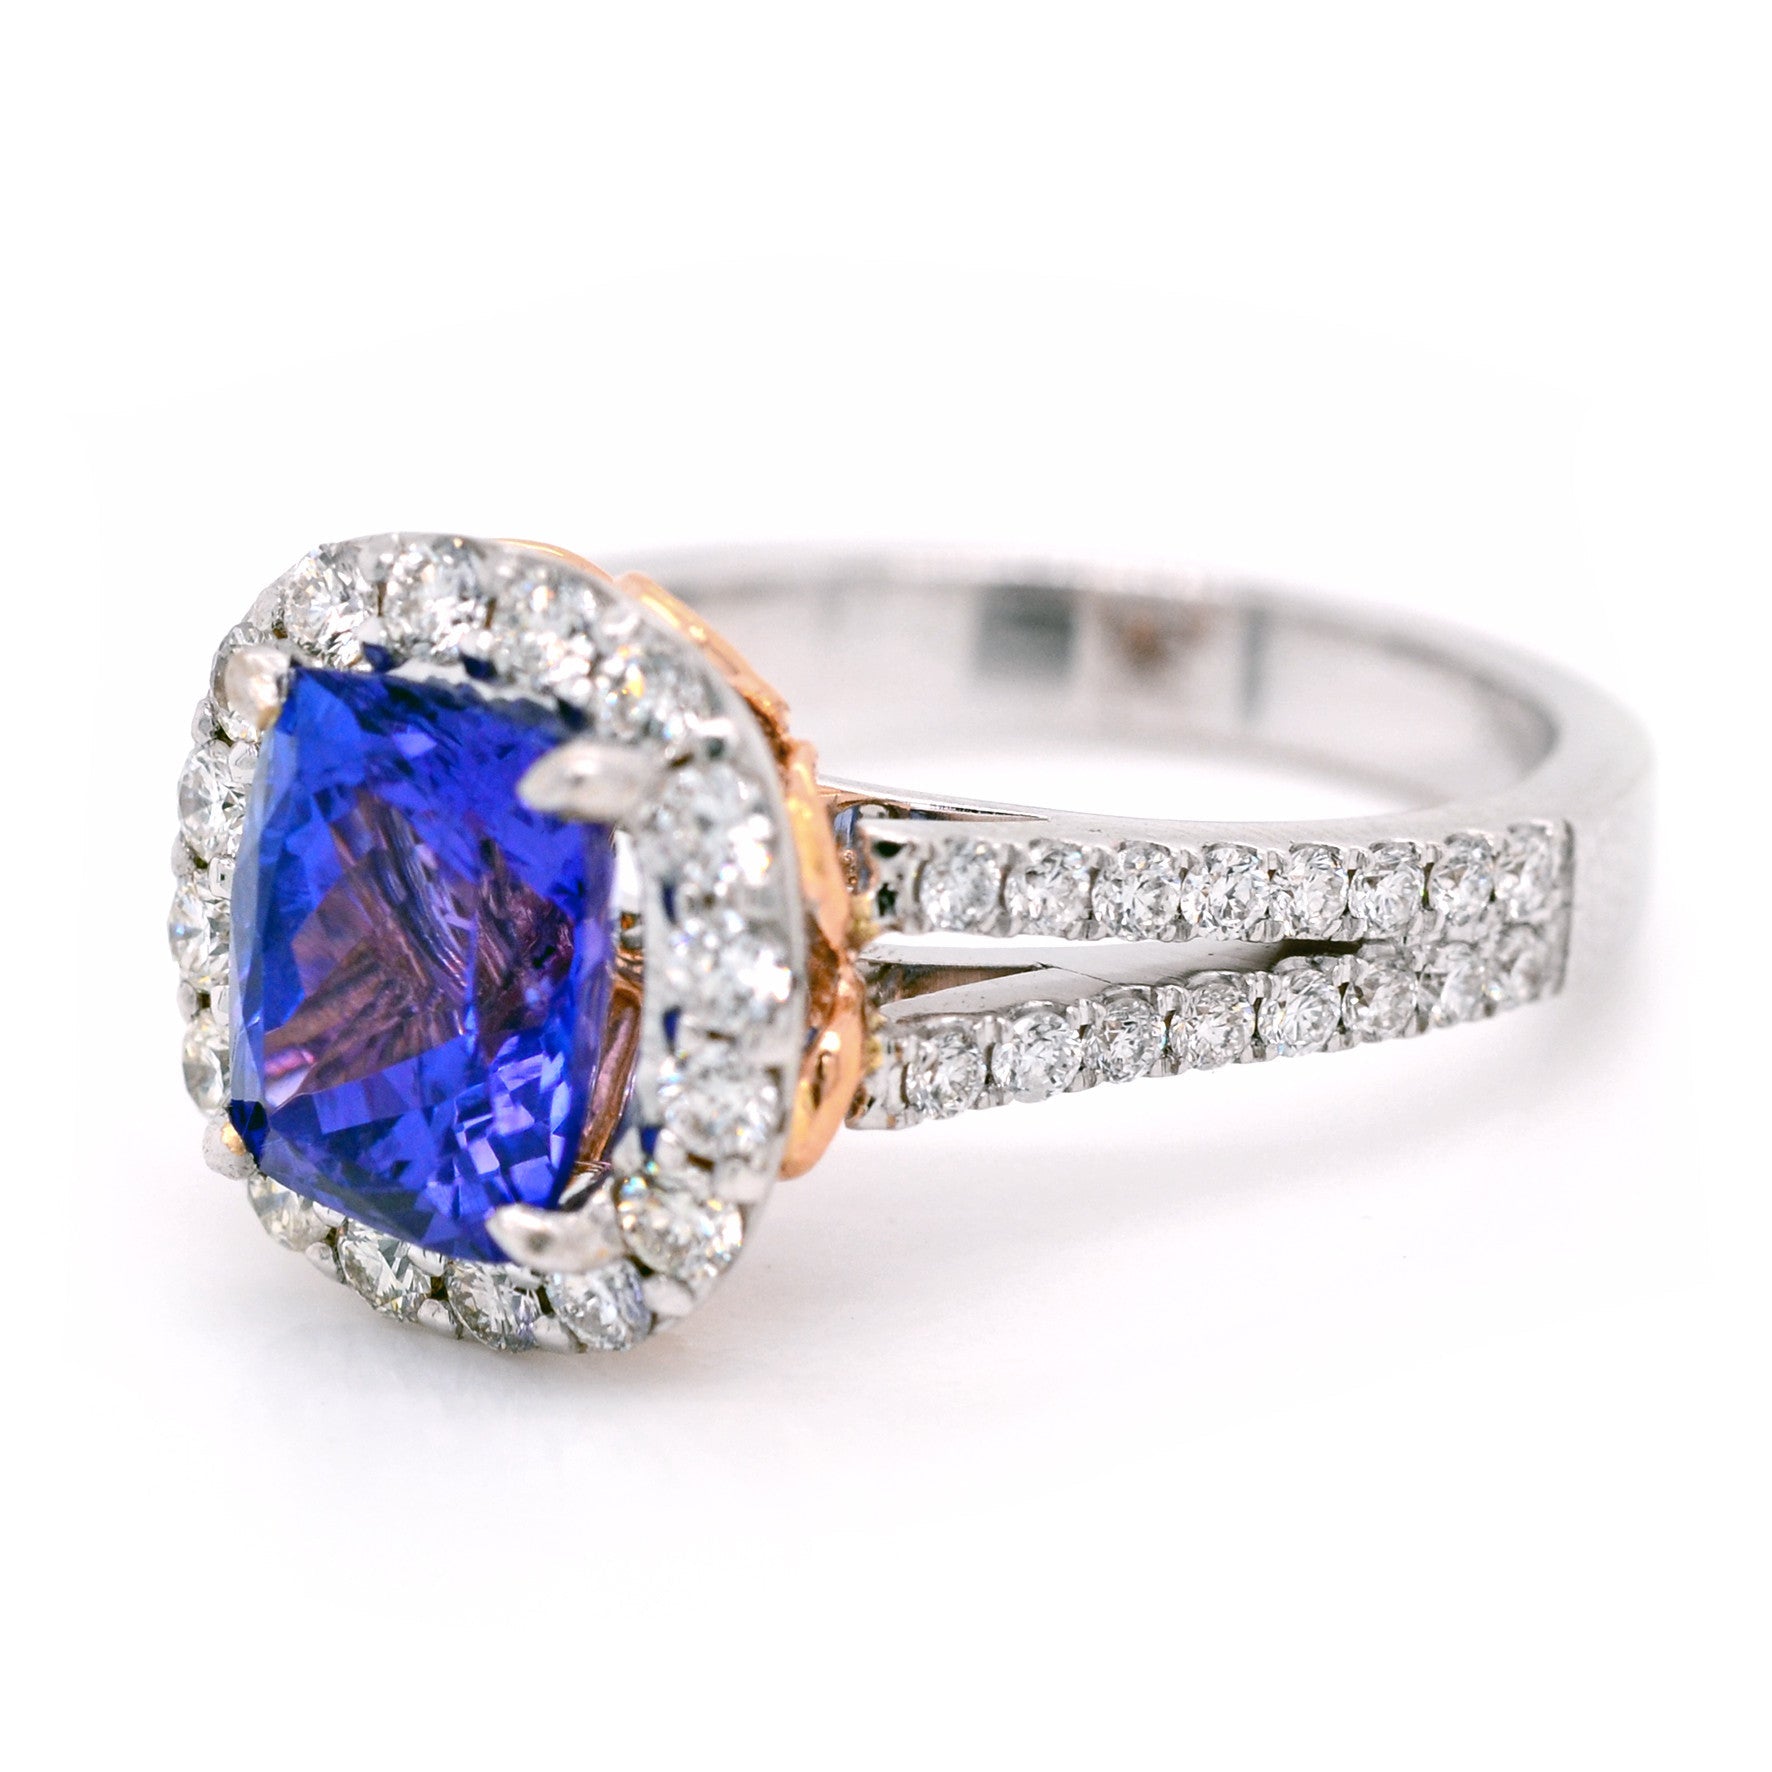 18ct White gold cushion cut tanzanite ring with a halo of diamonds - ForeverJewels Design Studio 8